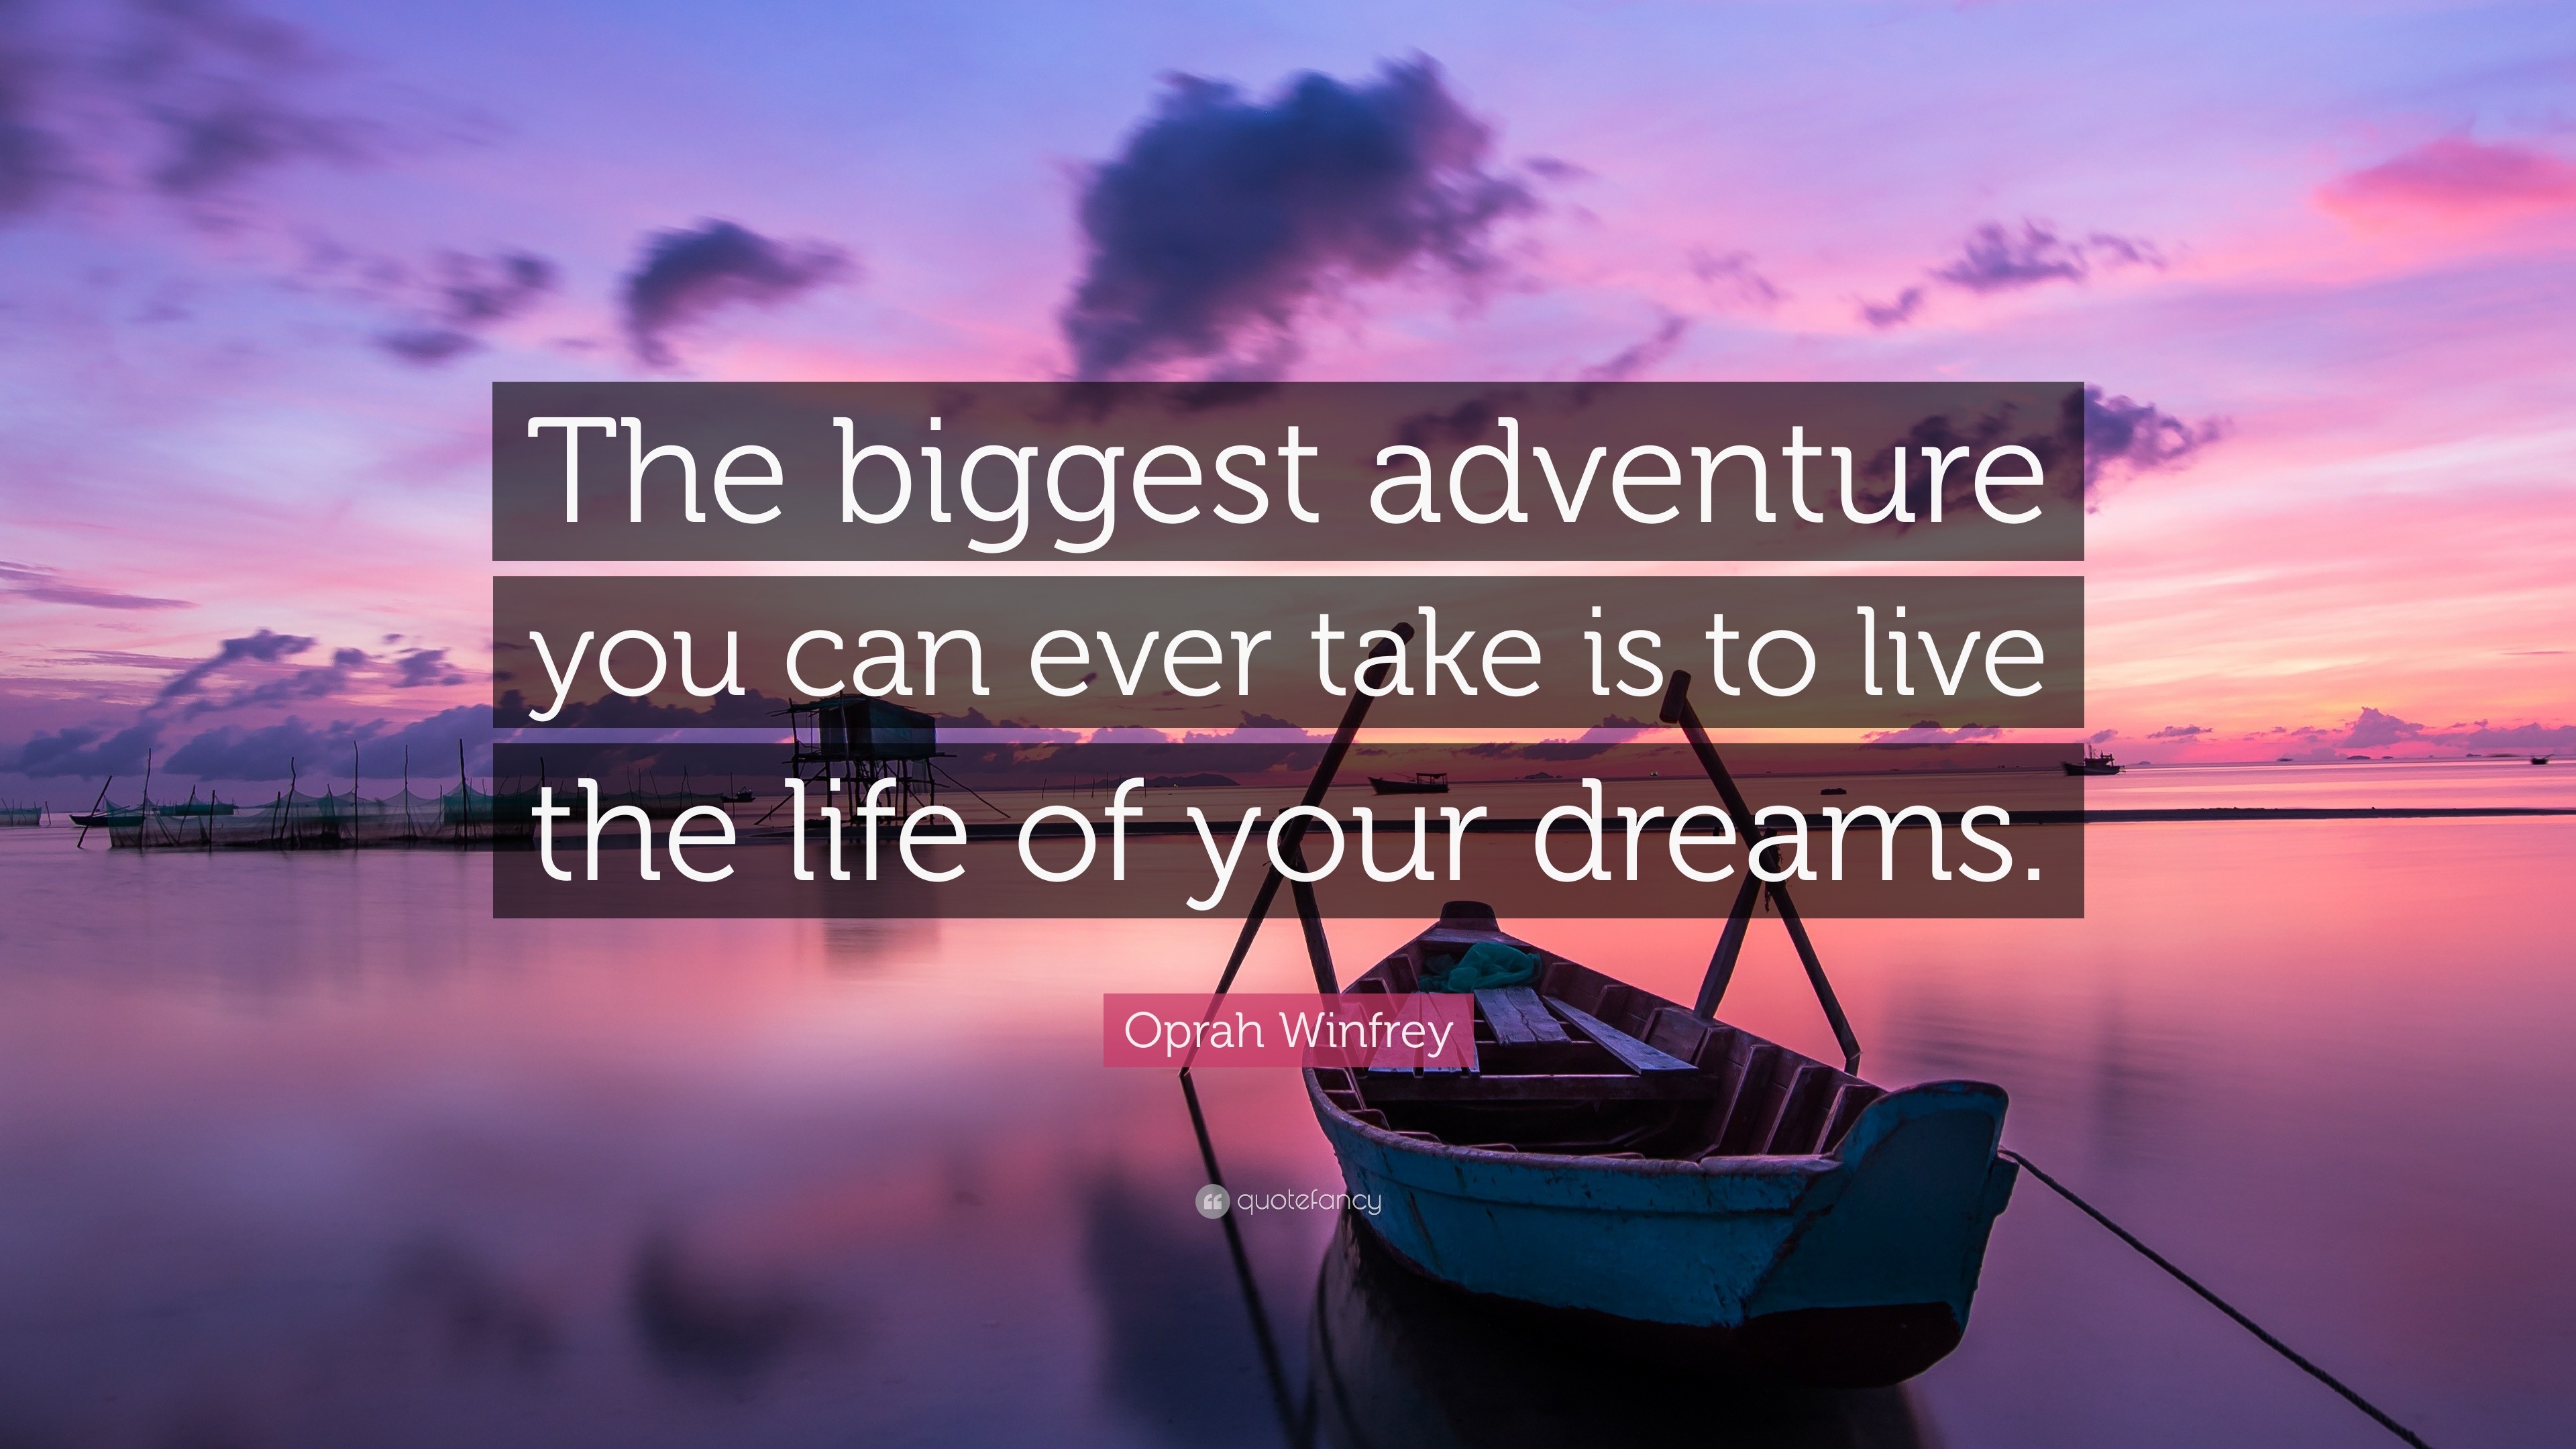 The biggest adventure you can take is to live the life of your